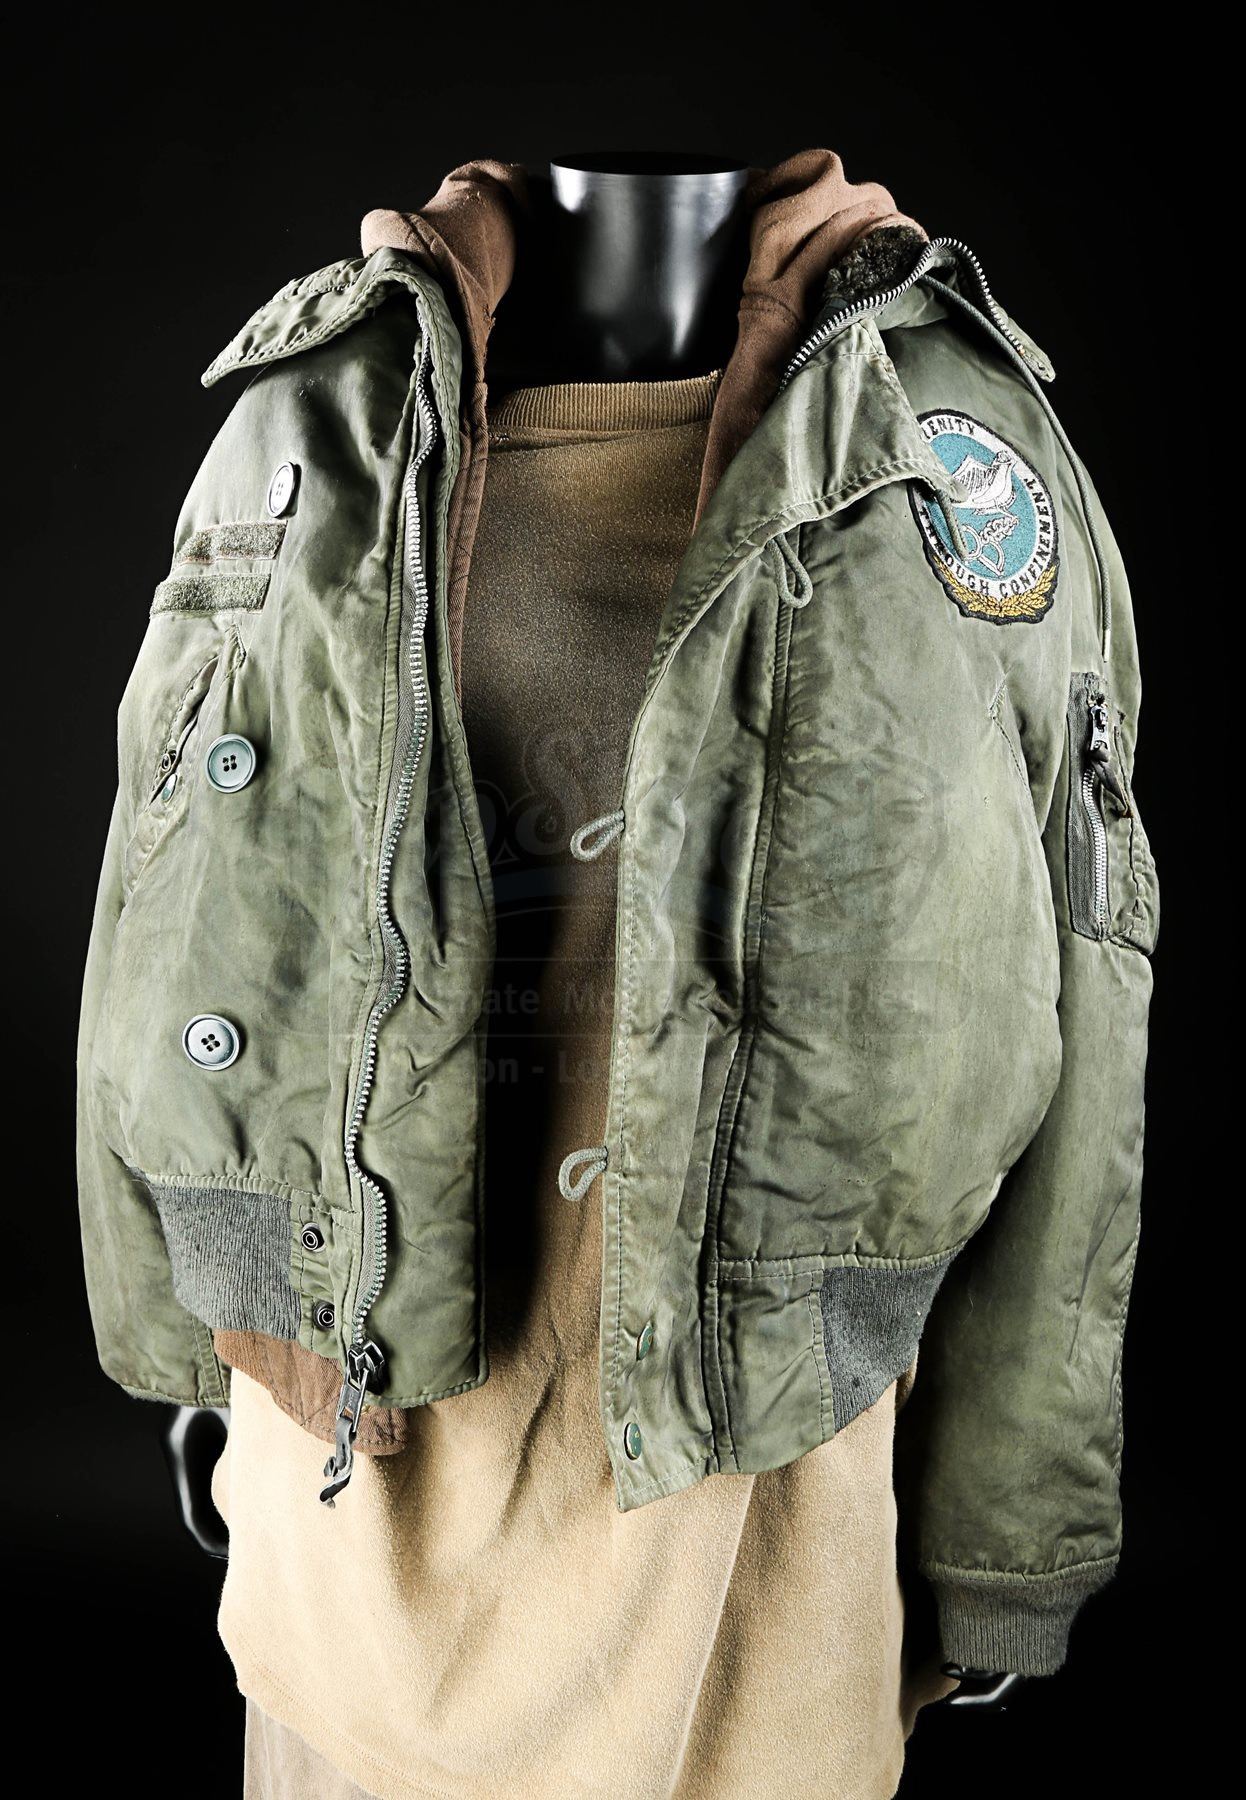 Road Less Traveled For Jacket Nuts The N 2b Flight Jacket Am I Crazy 4 Loving It Page 7 The Fedora Lounge